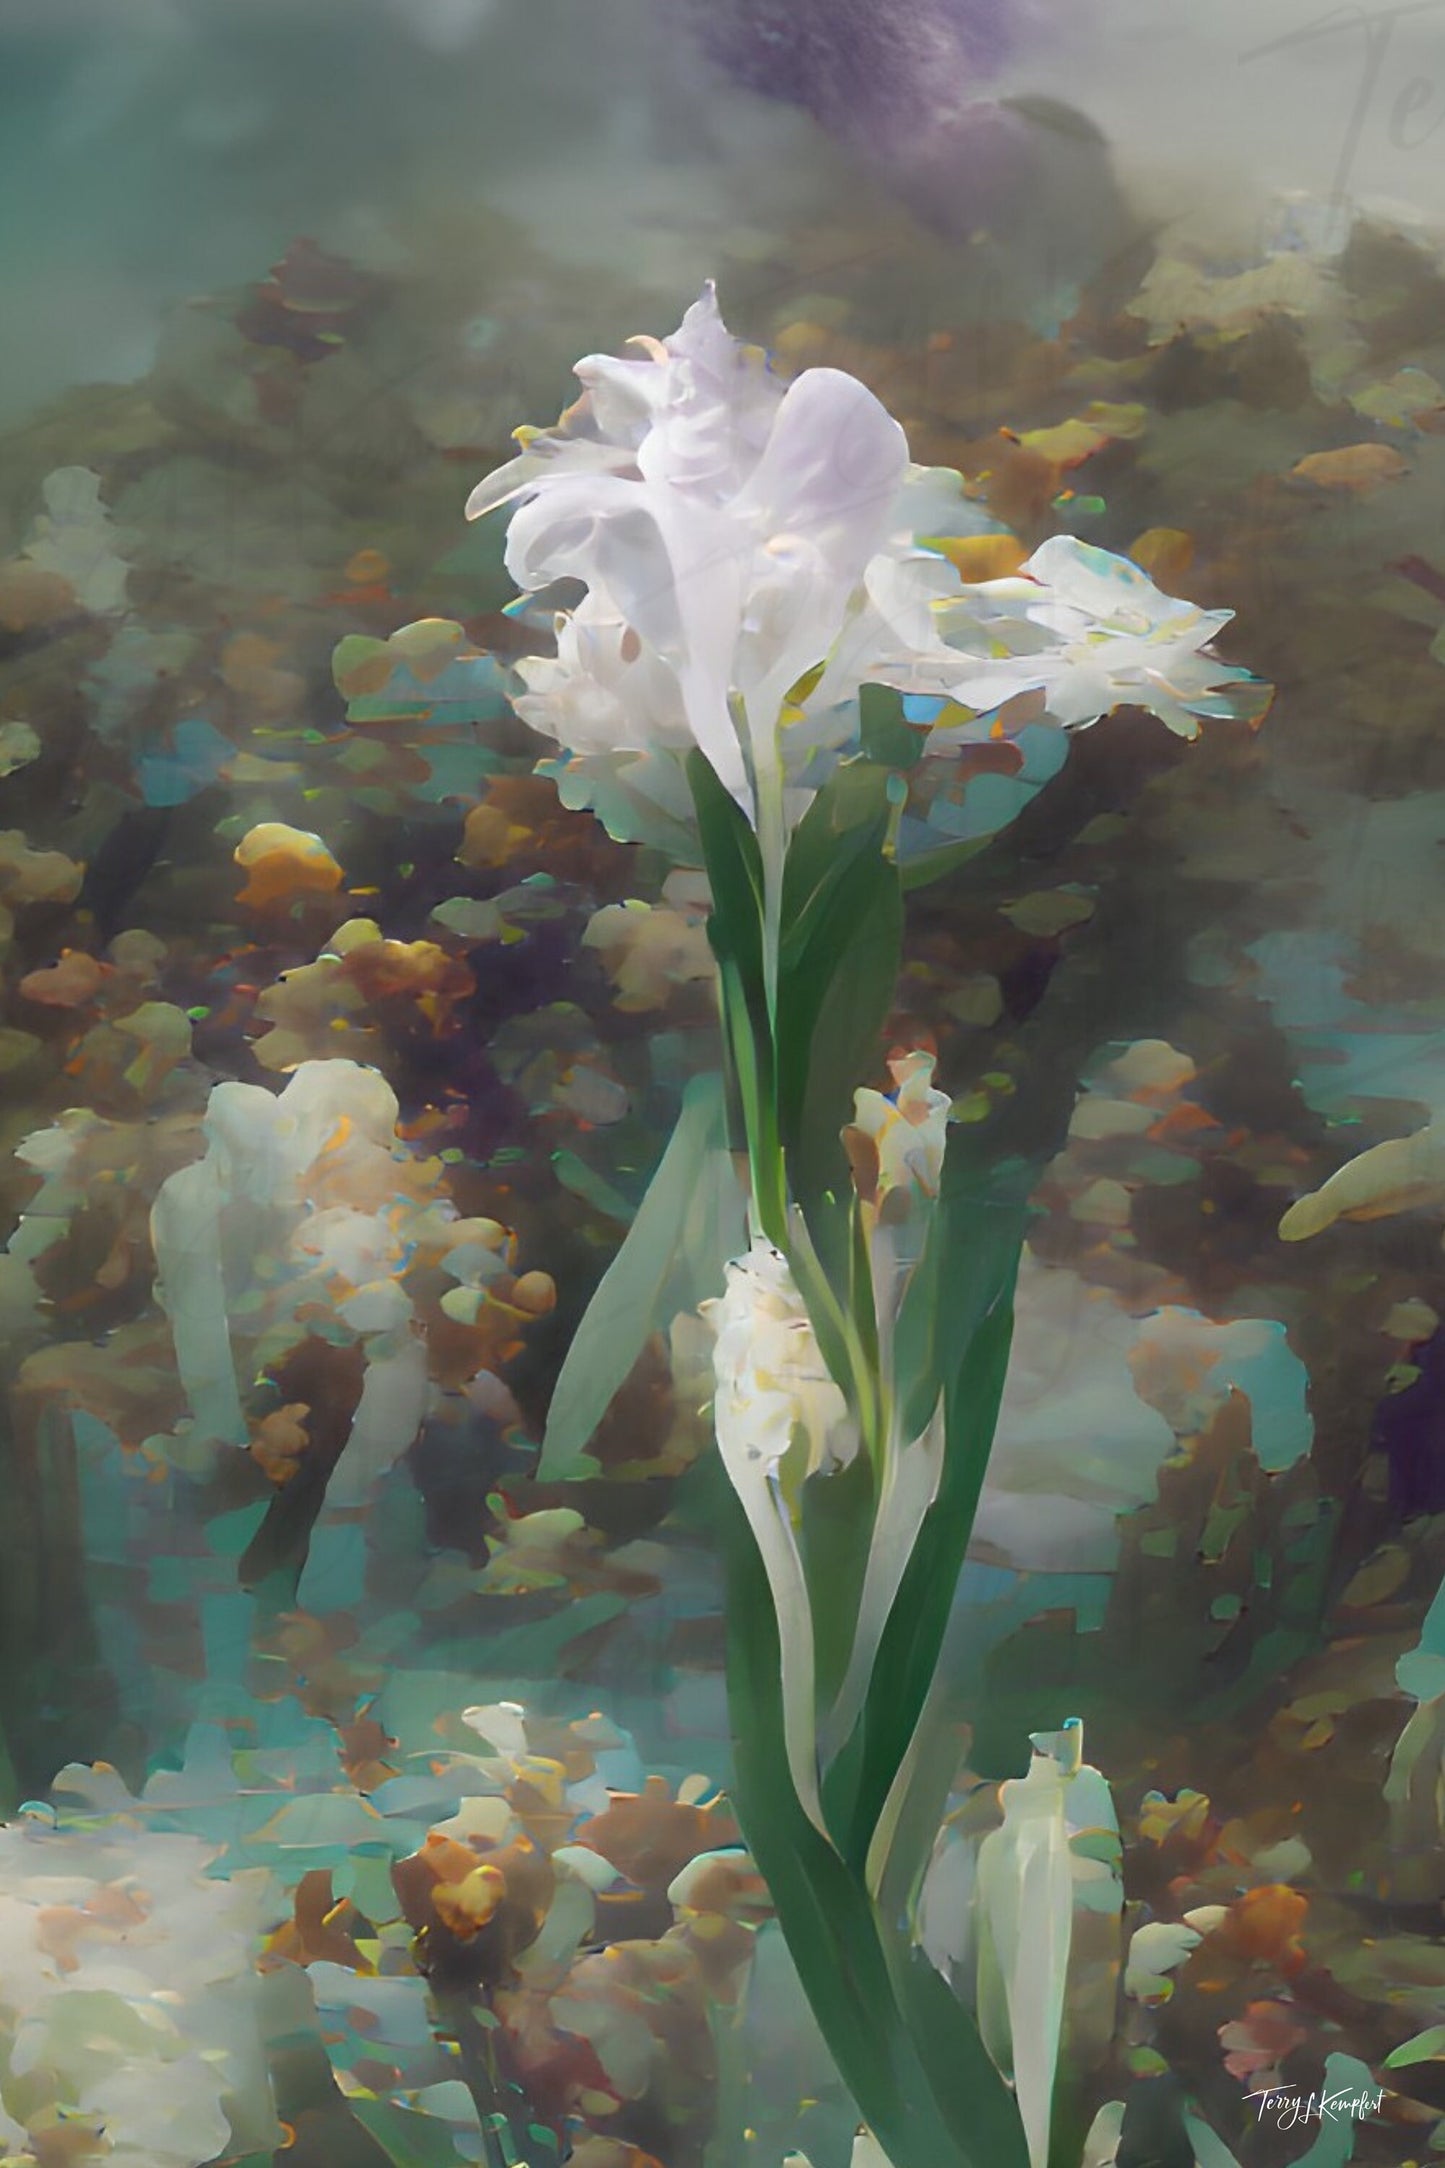 White Takes Flight - Snow White Iris painting - Fine Art print ready to frame, Gallery Wrapped Canvas -  multiple size options.